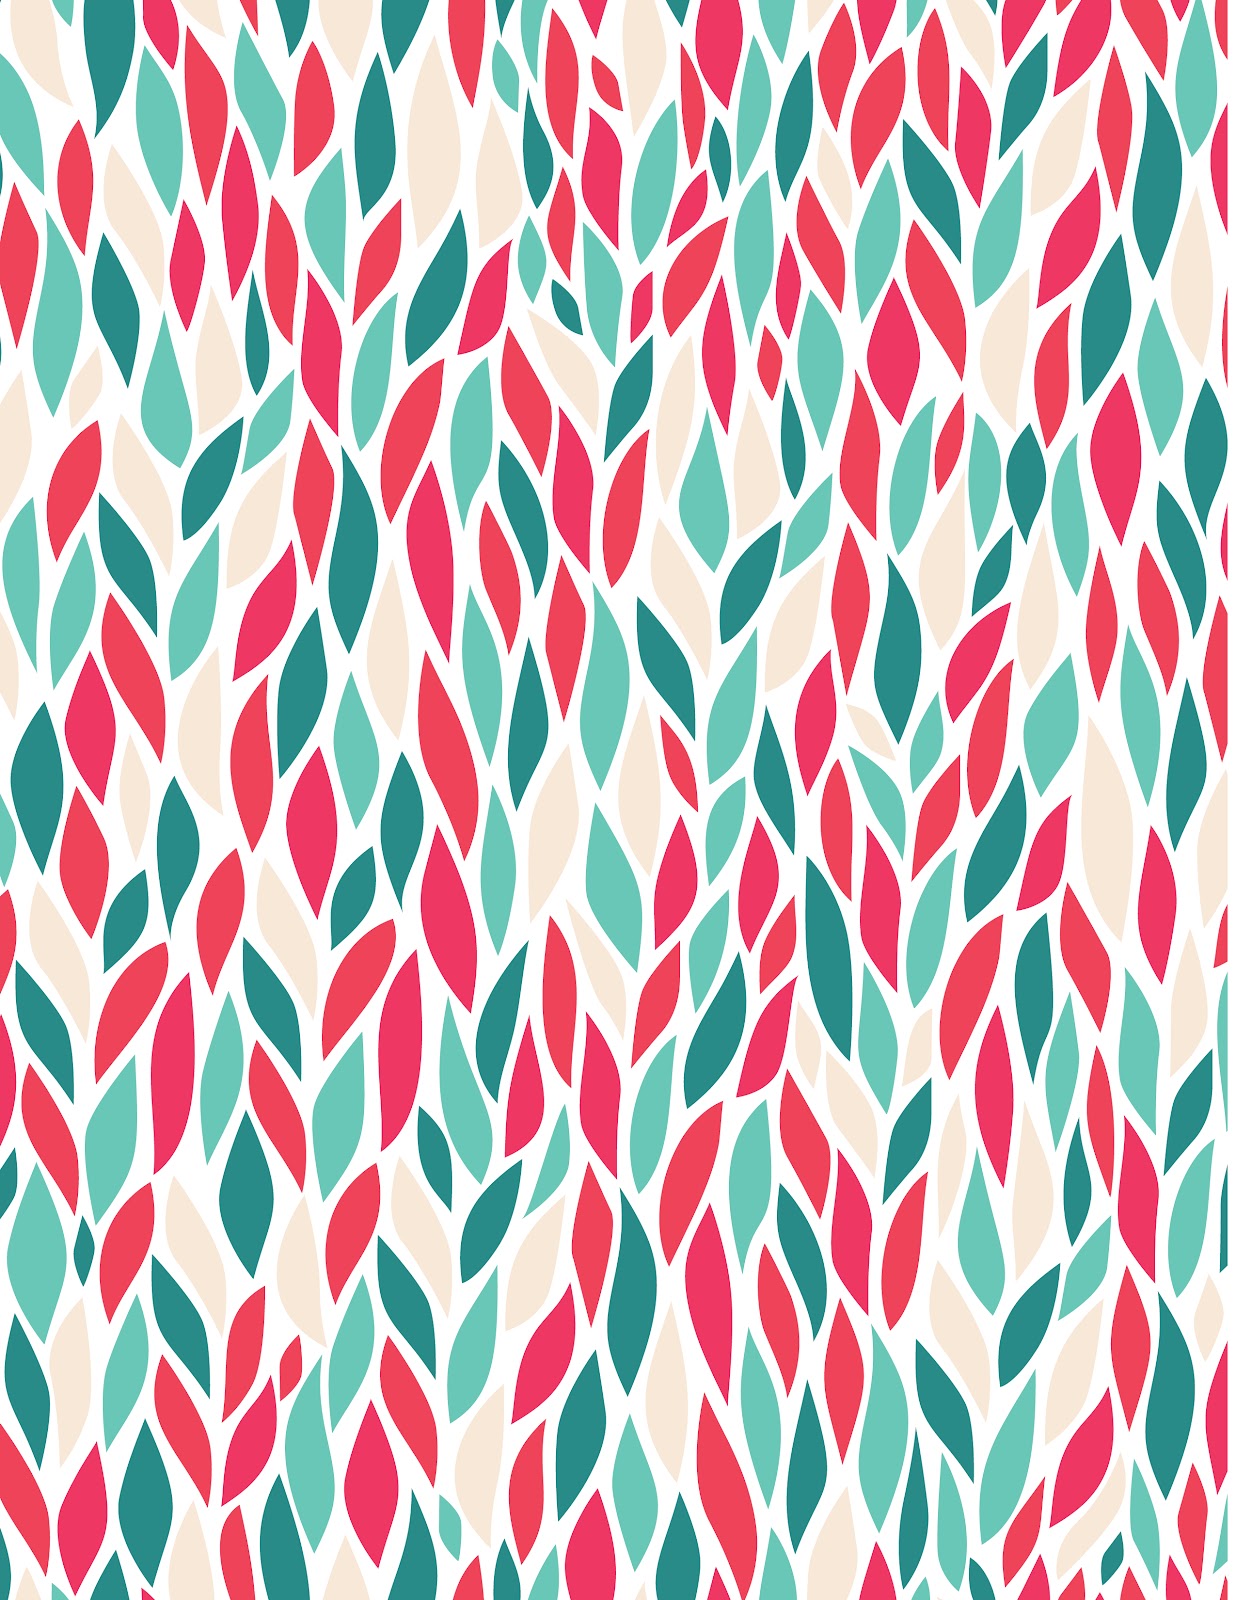 8 Best Images of Pretty Printable Paper Patterns Pretty Origami Paper